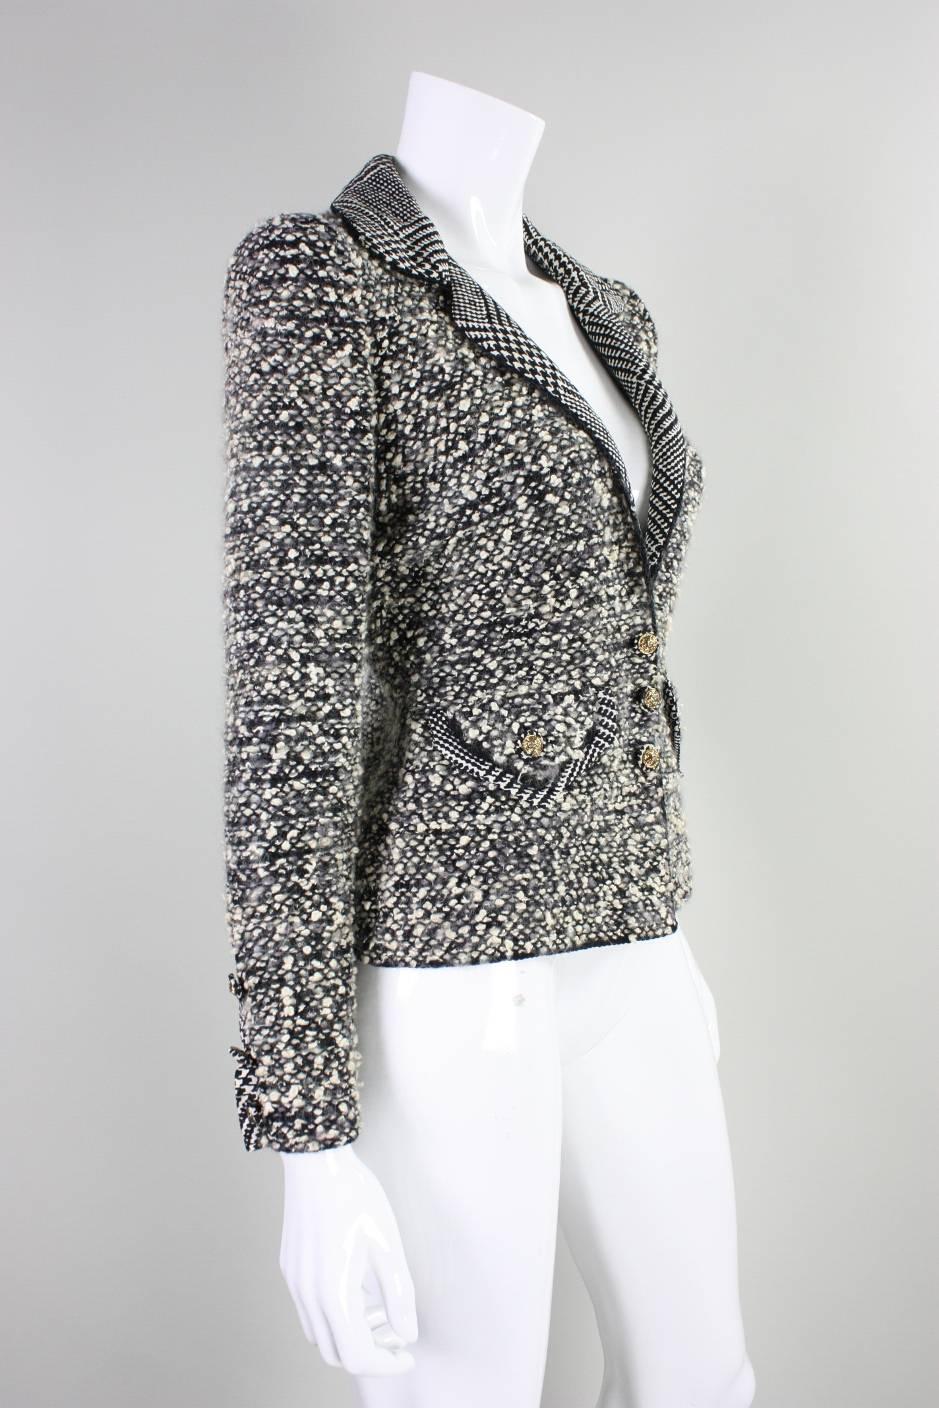 Vintage jacket from Adolfo dates to the 1980's and is made of a black, white, and gray wool boucle.  It features a notch lapel with silk that is printed in a houndstooth pattern.  Matching fabric trims the buttons, faux pockets, and faux opening at